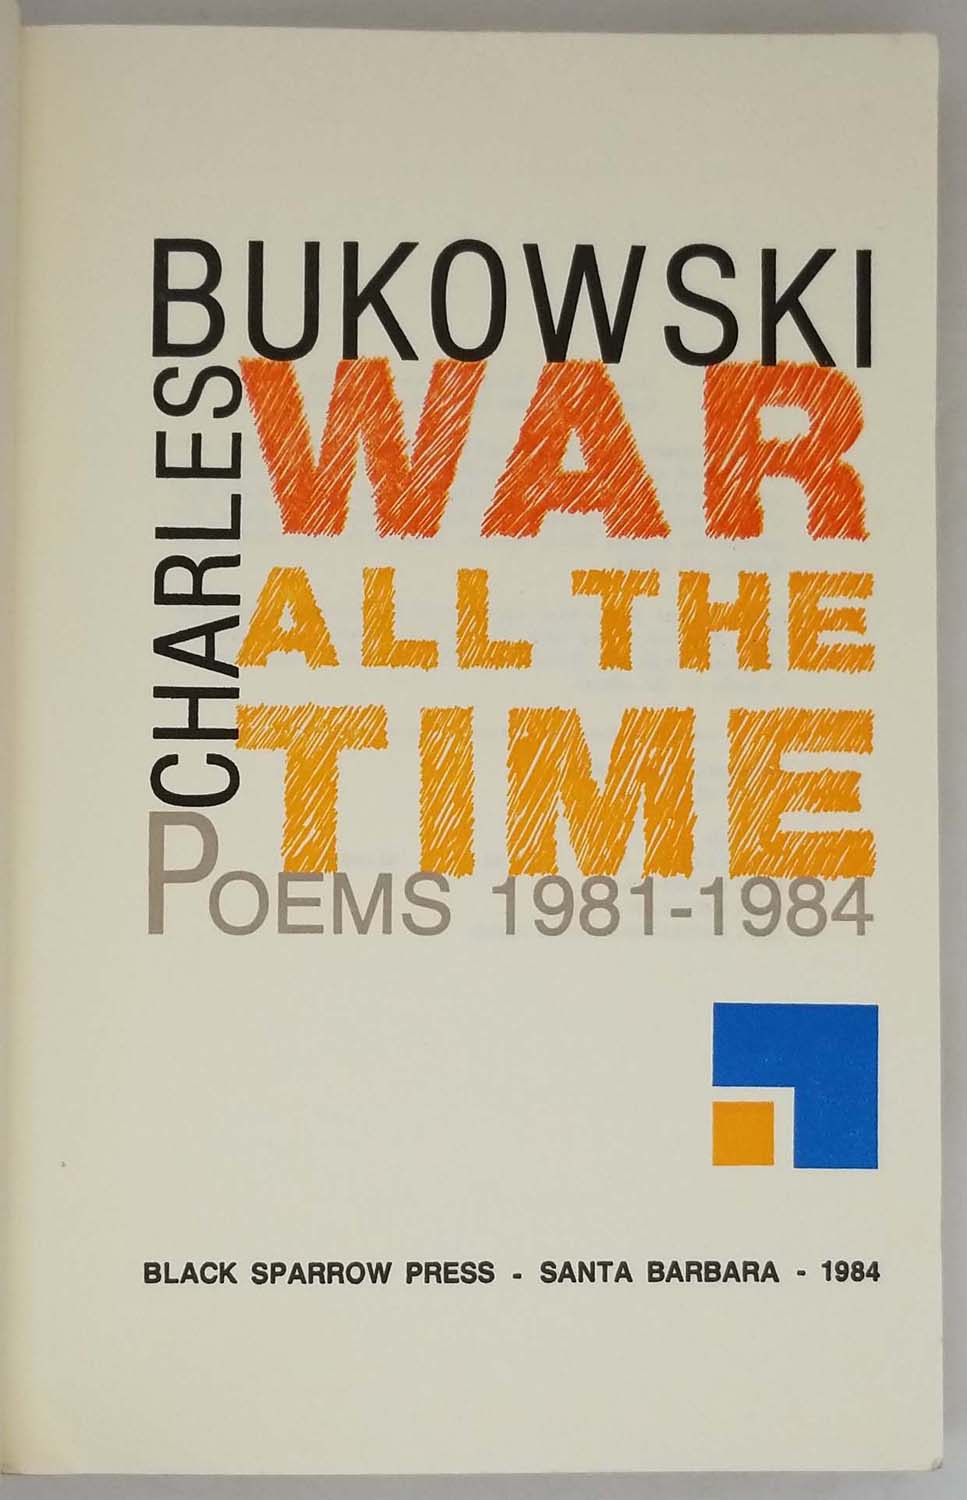 War All the Time (Poems 1981-1984) - Charles Bukowski 1984 | 1st Edition